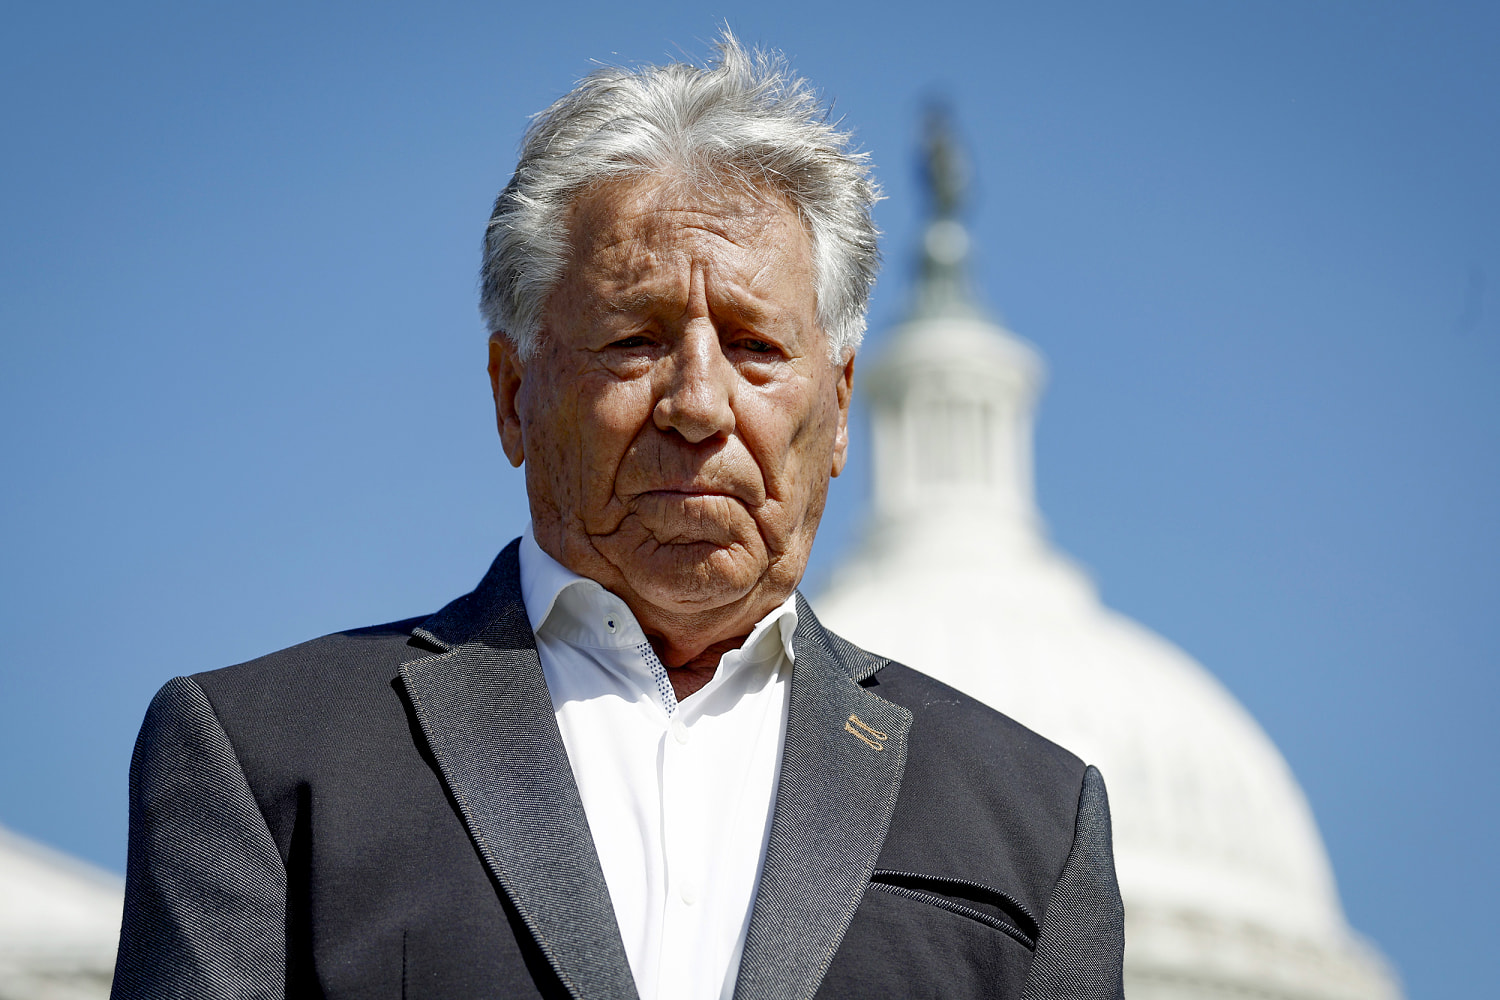 Mario Andretti: Formula 1 owner personally threatened to shut out team Andretti